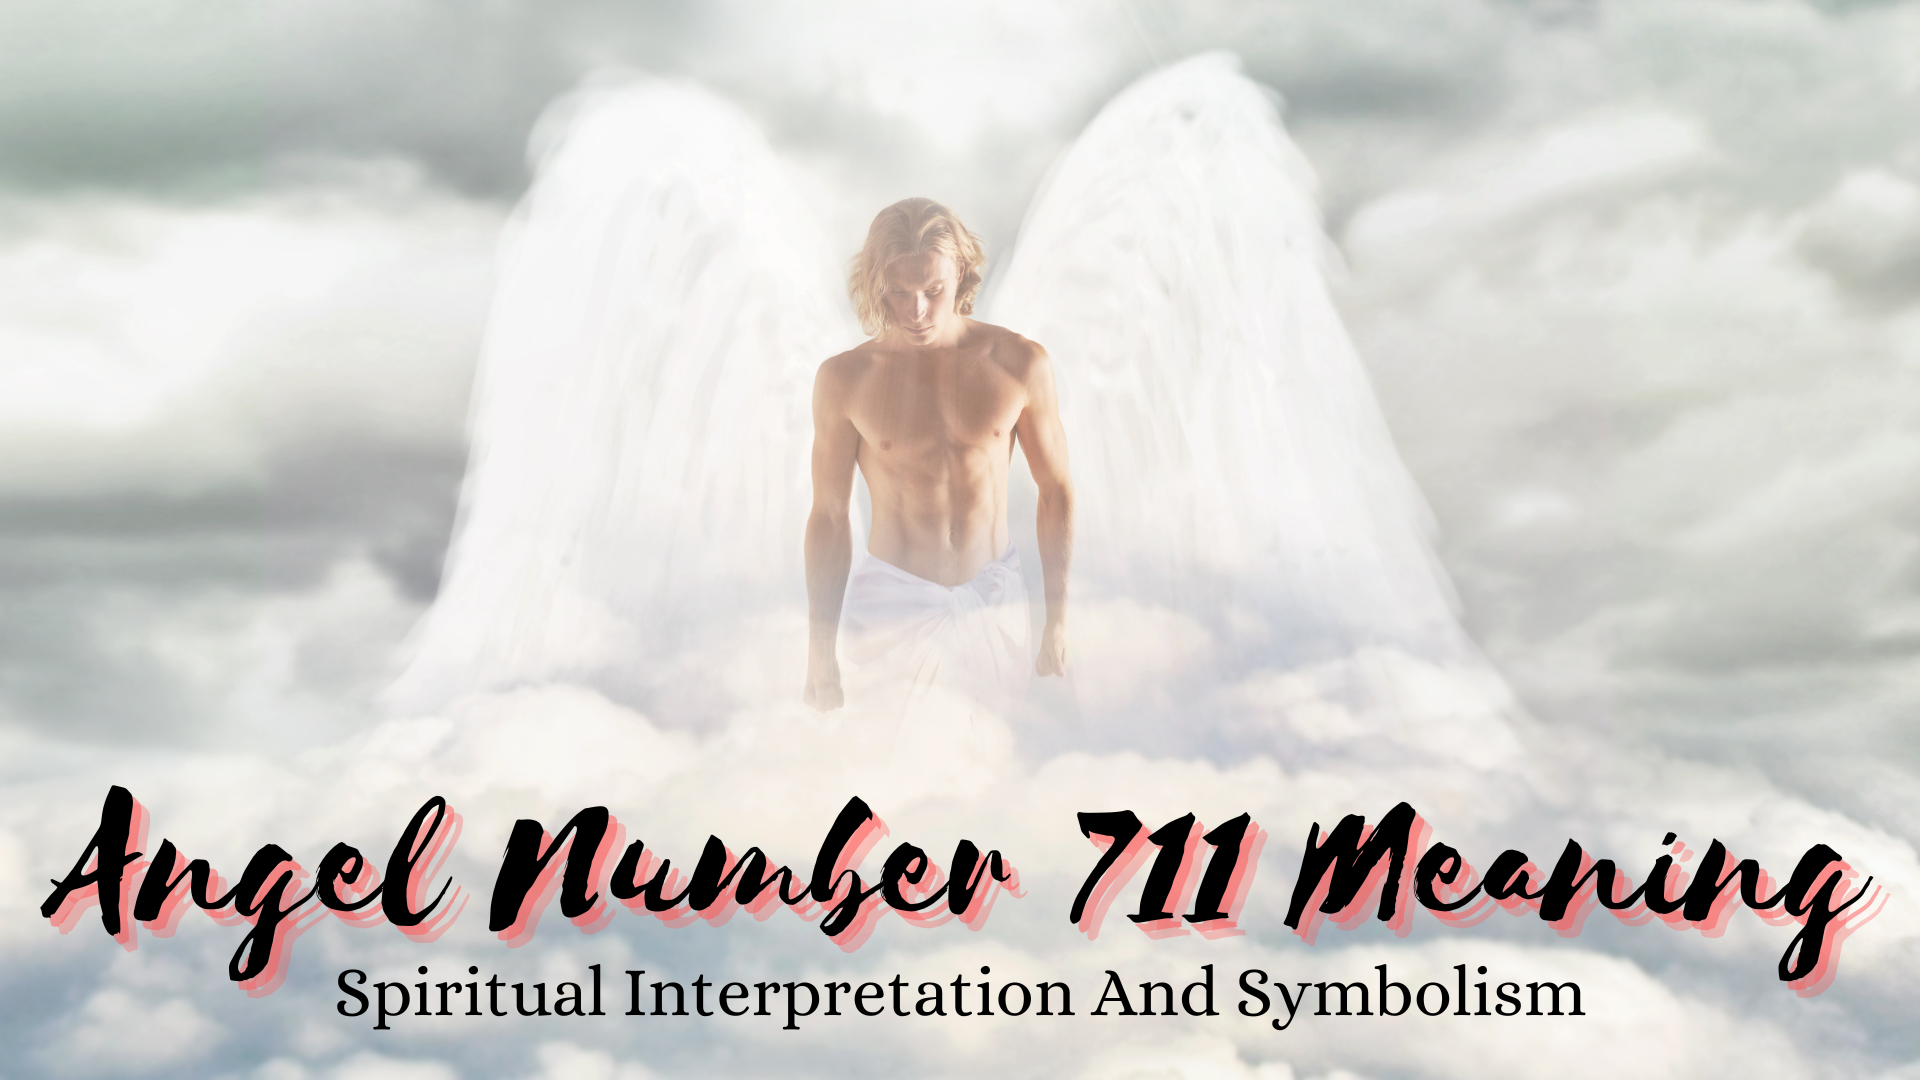 Angel Number 711 Meaning - And Symbolism And Spiritual Interpretation